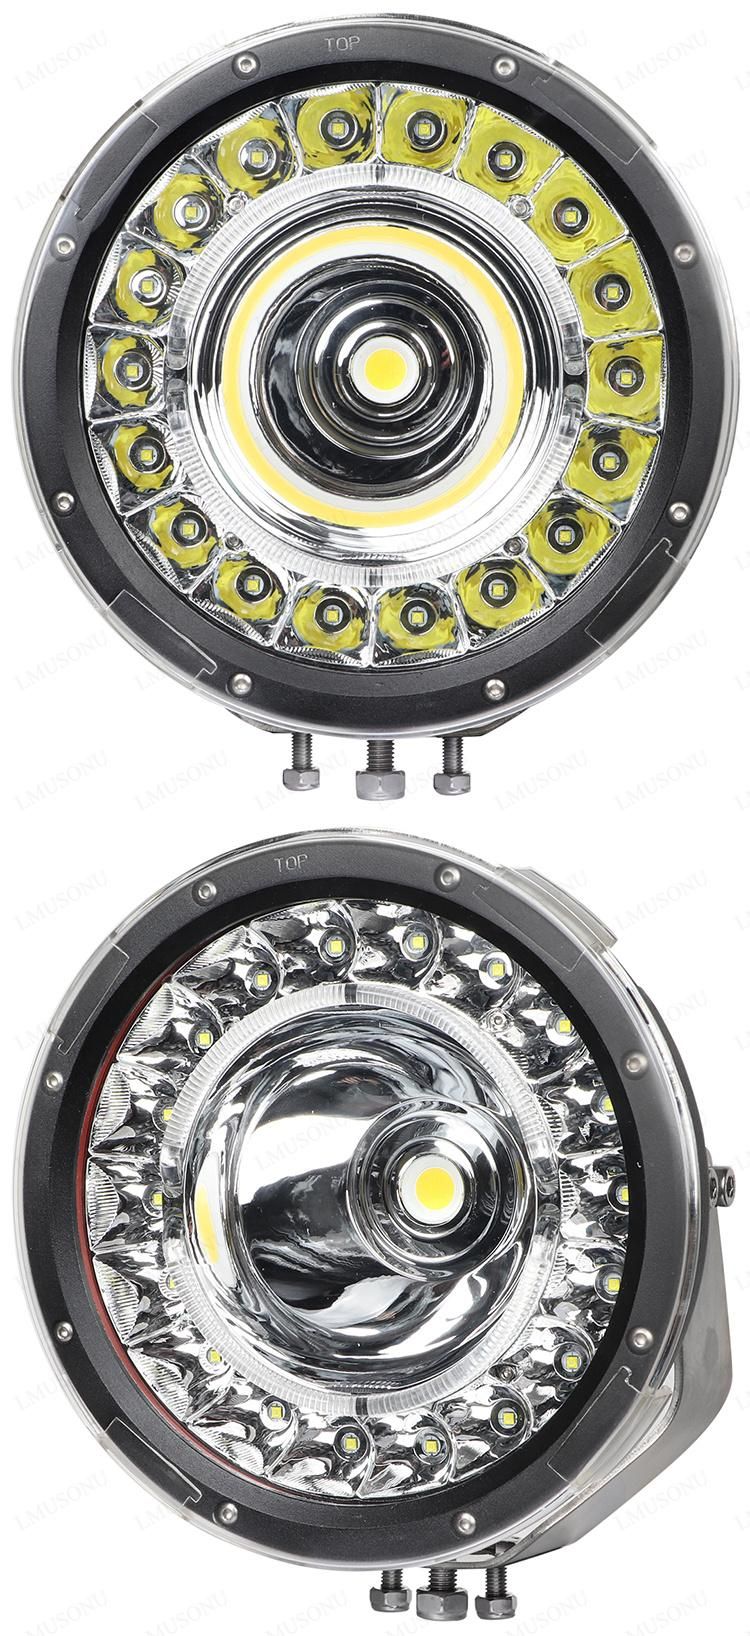 9.0 Inch 162W CREE 4X4 off Road Auxiliary LED Driving Light with DRL Light for Auto Car Truck Boat